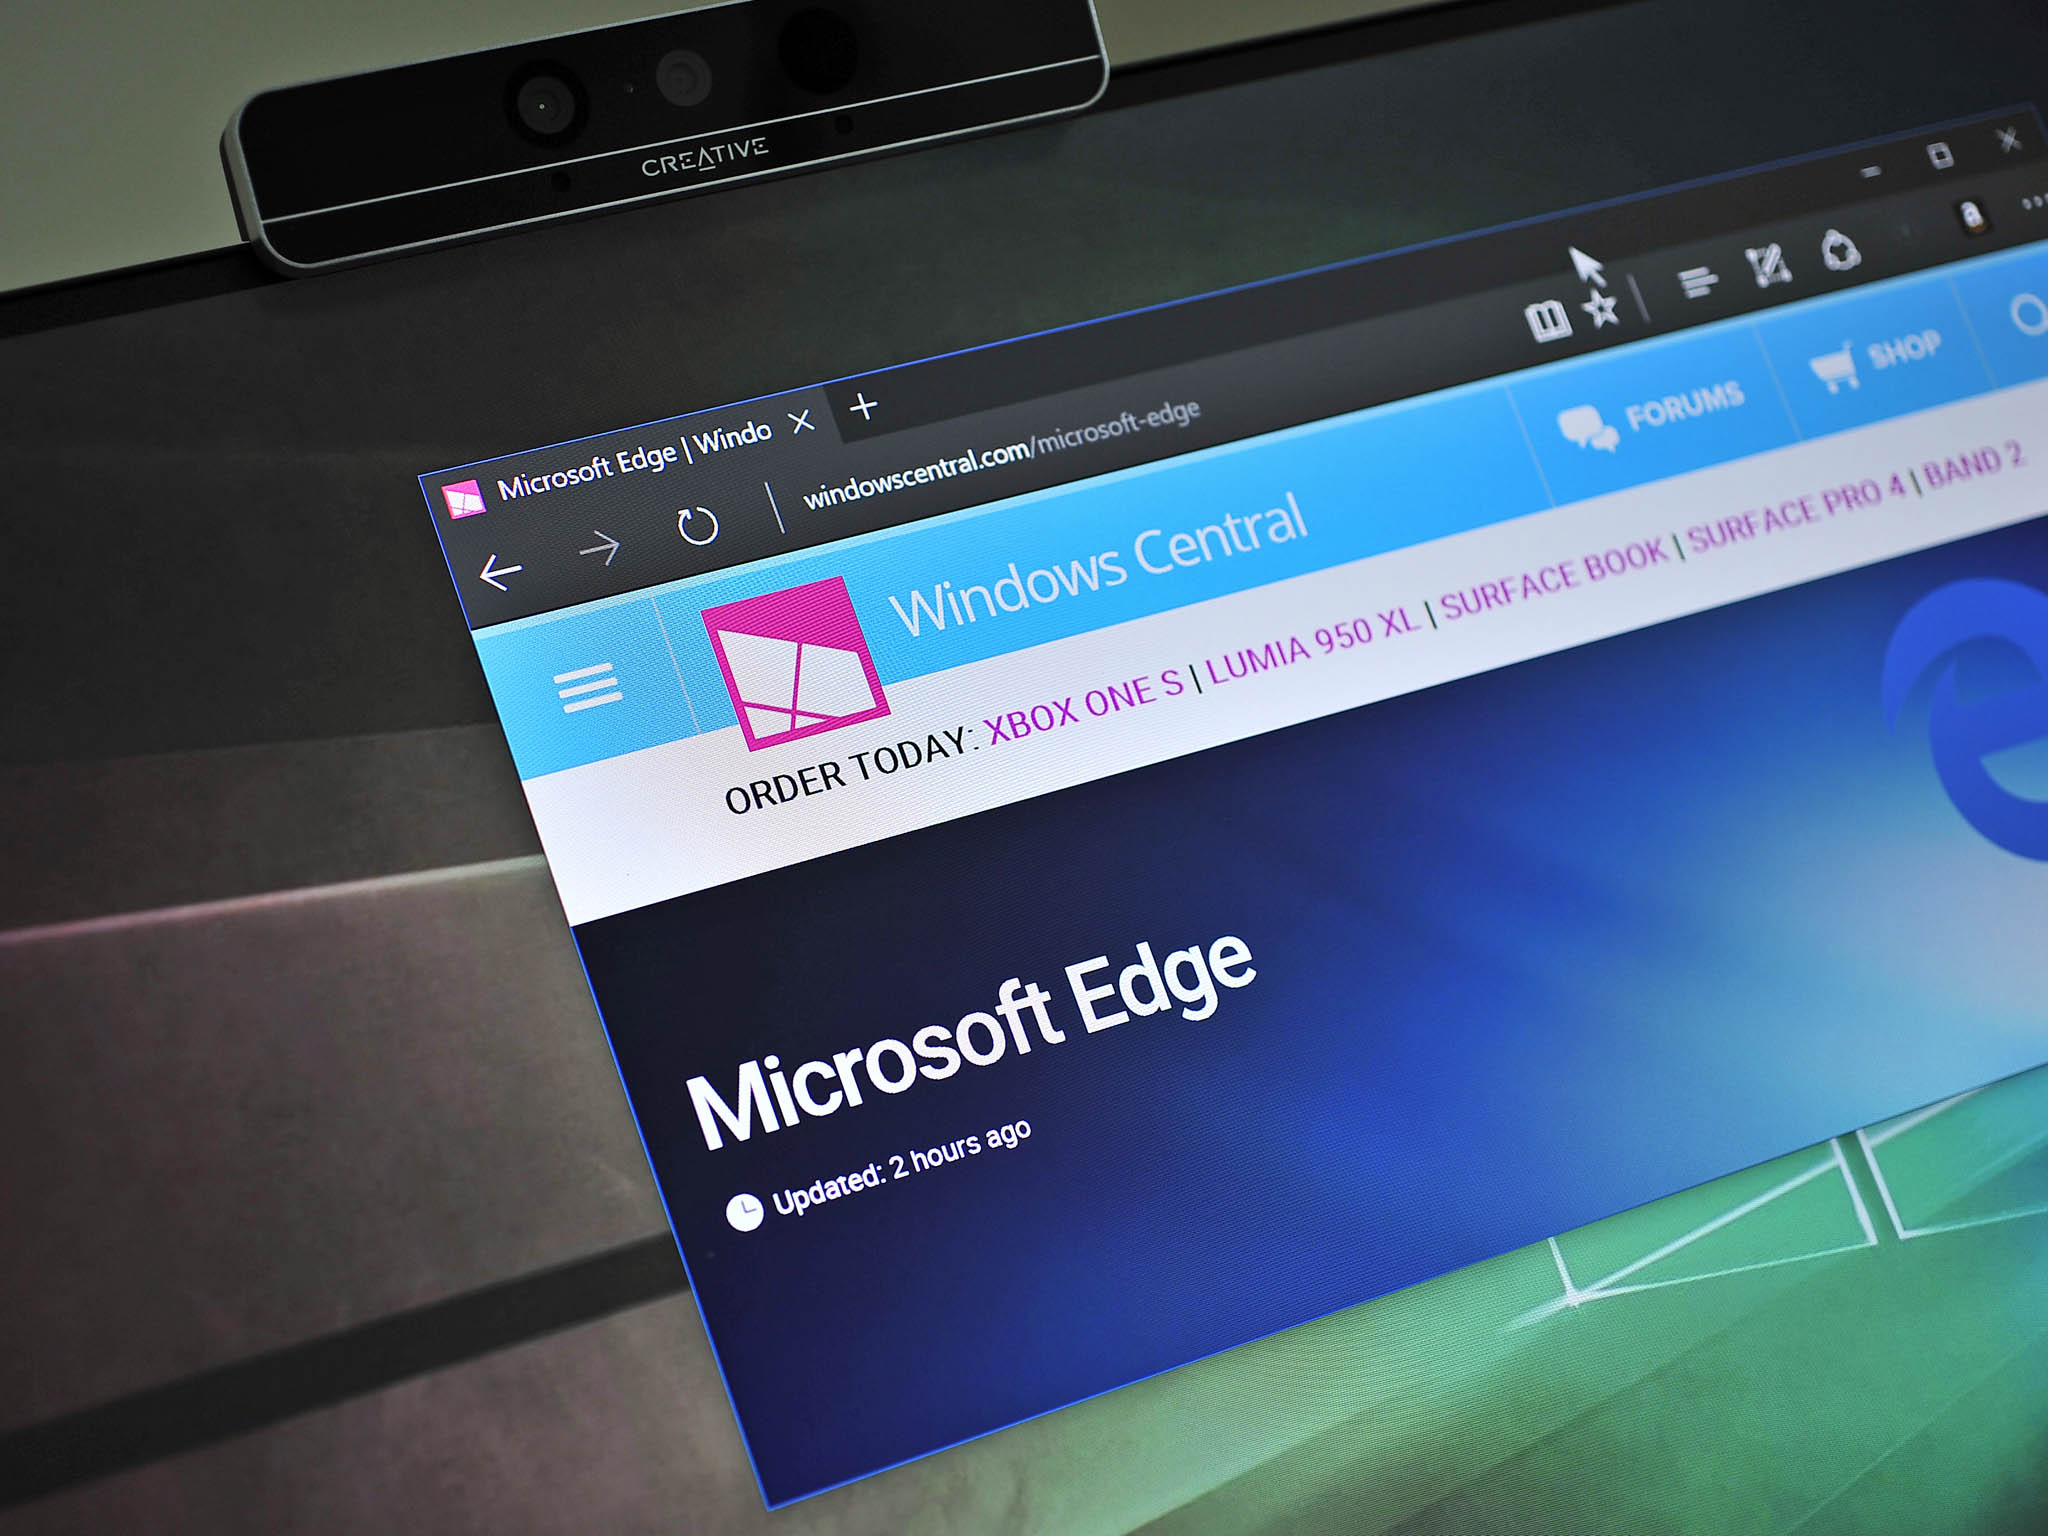 Edge once again comes out on top in Microsoft browser battery life test